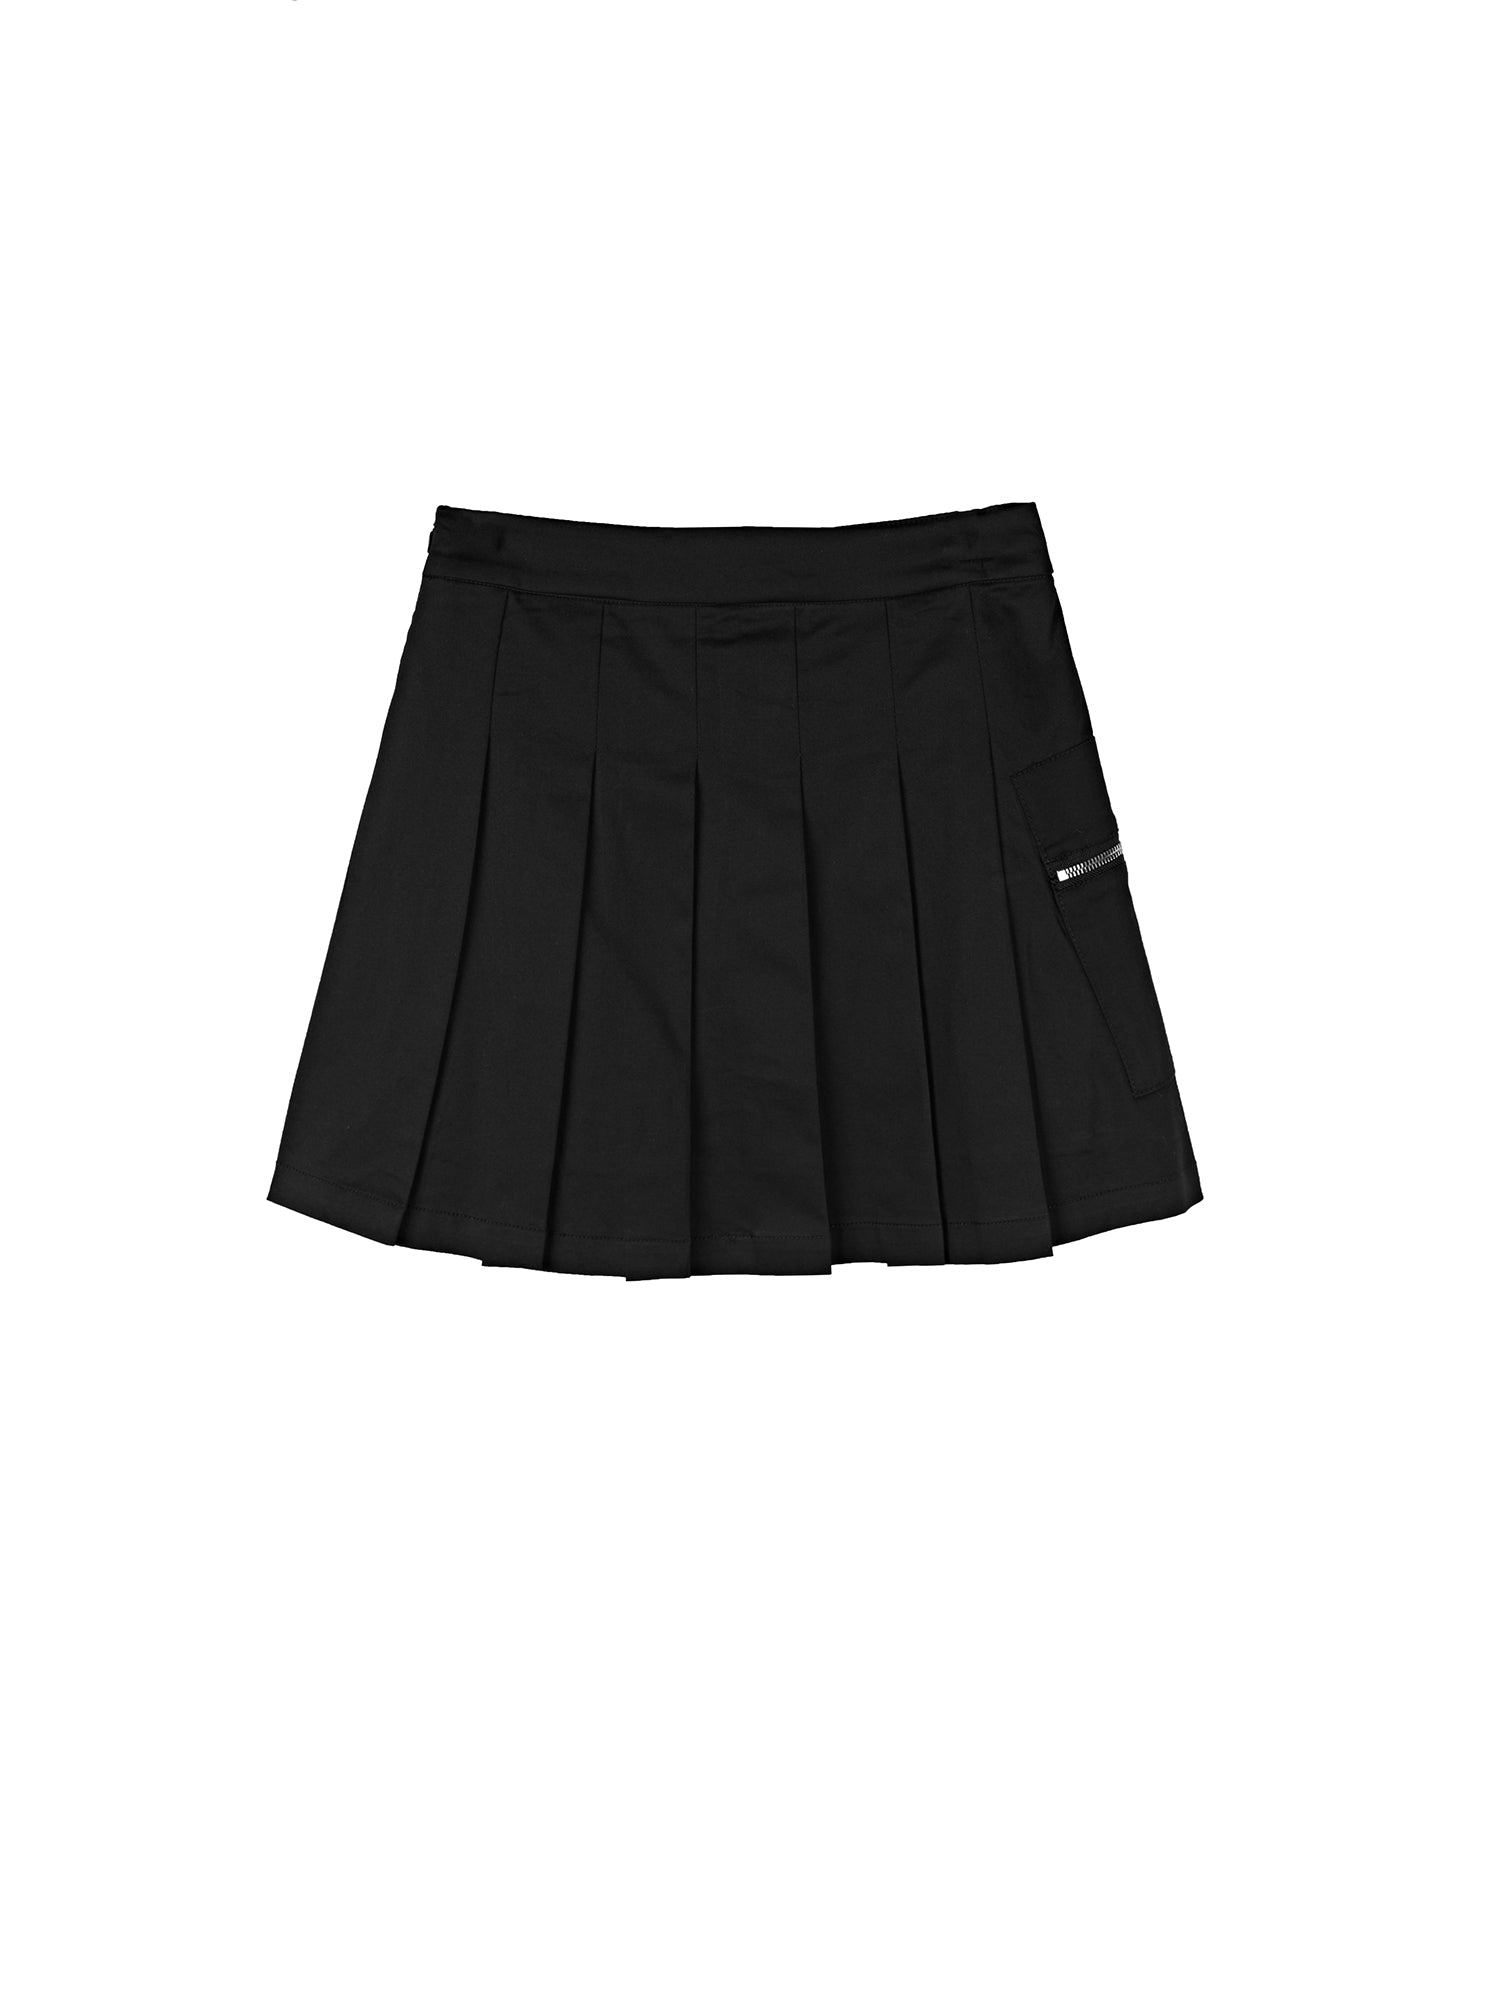 Youthful Black A-line Pleated Skirt - S·DEER